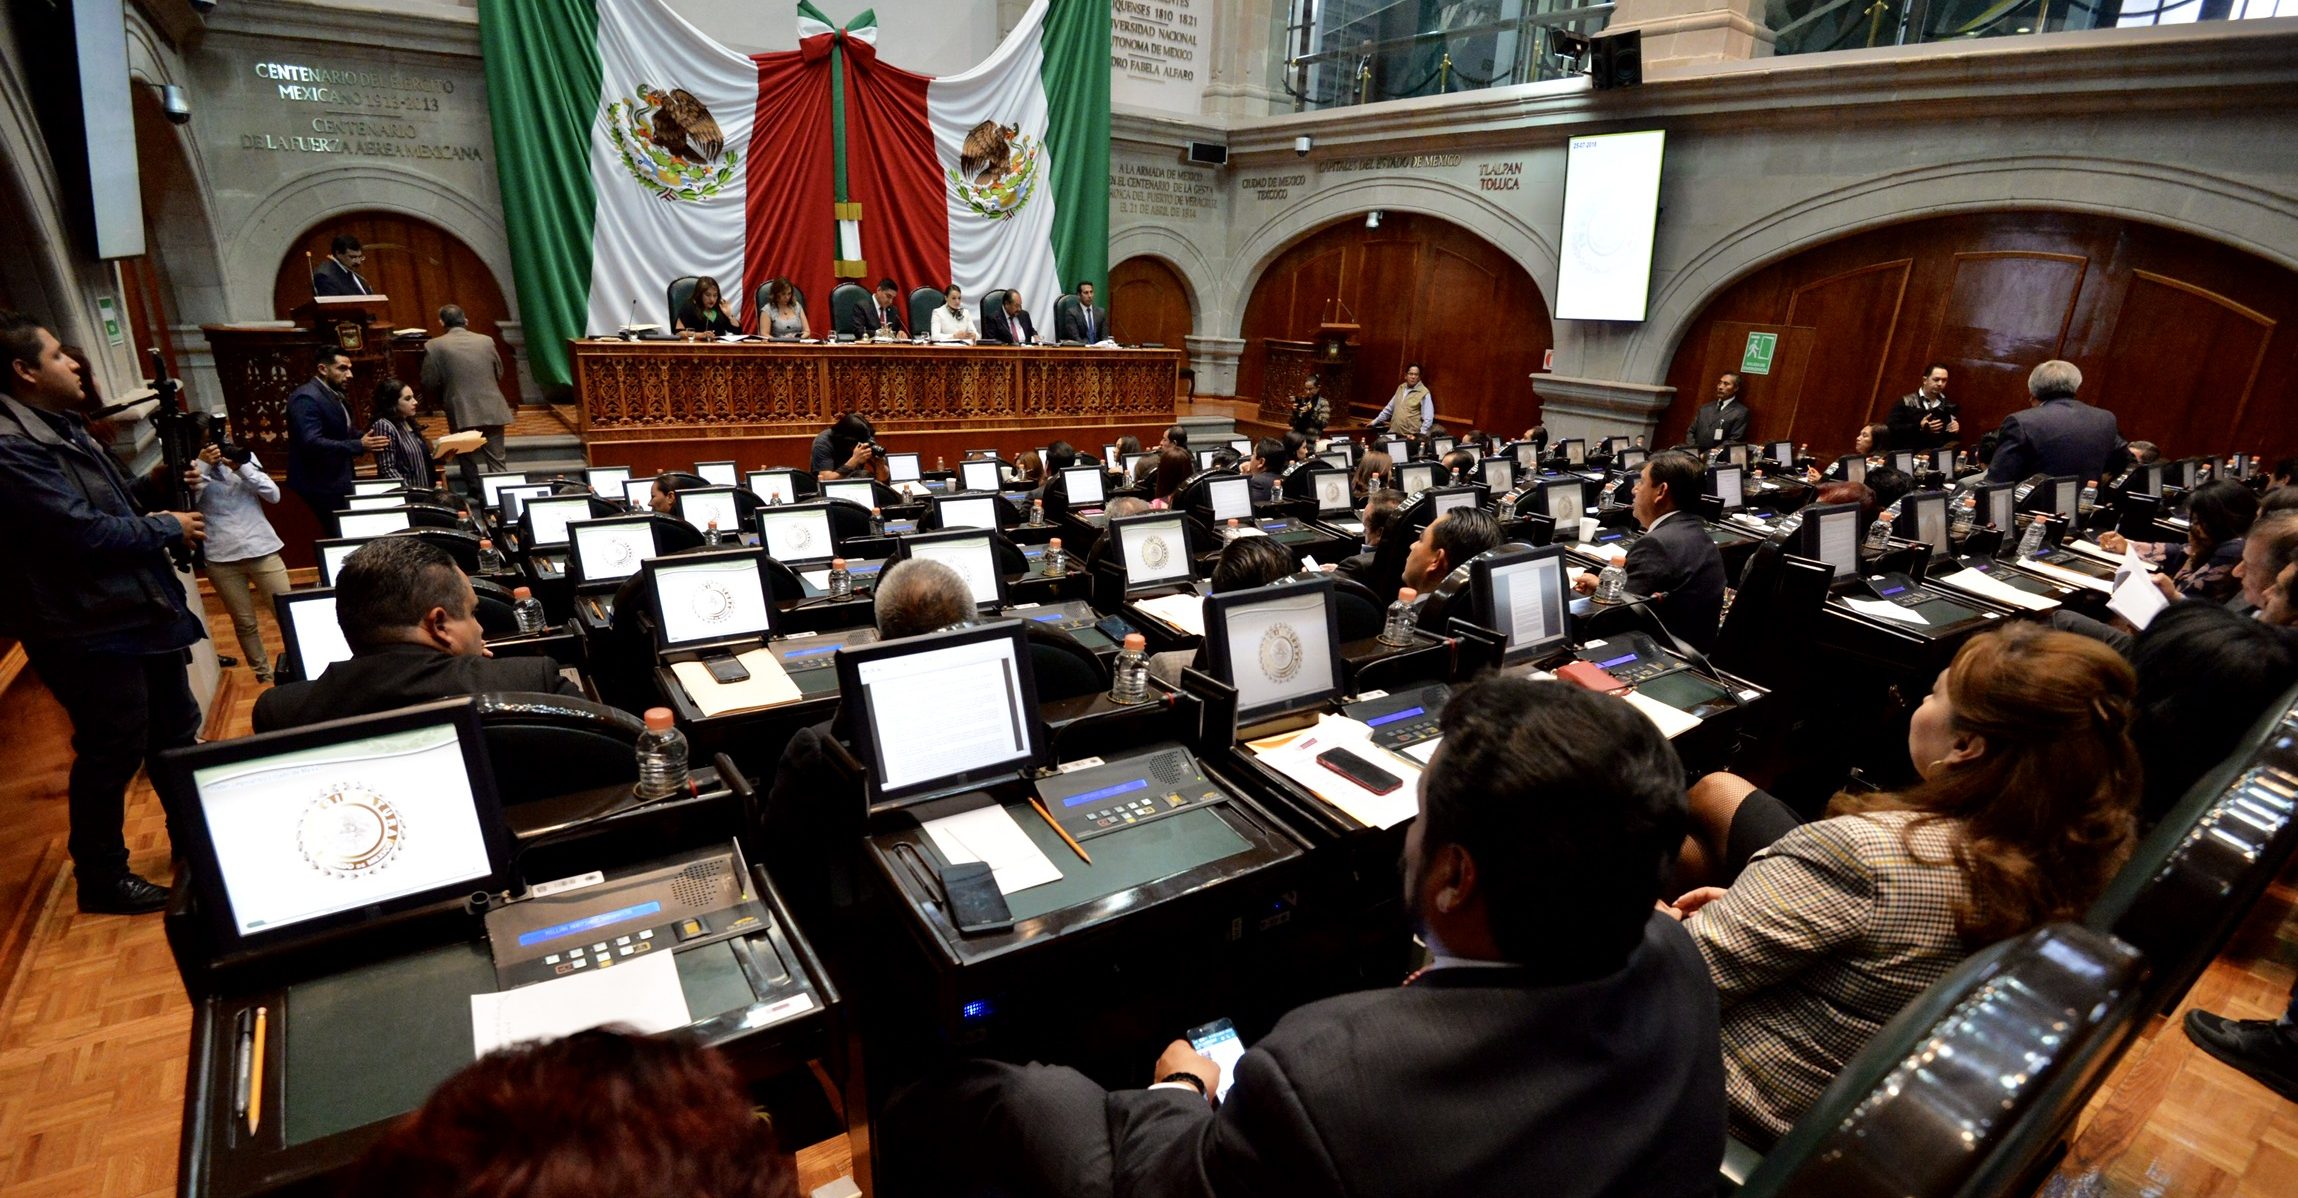 Morena members who lost his place in the State of Mexico are trying to recover it